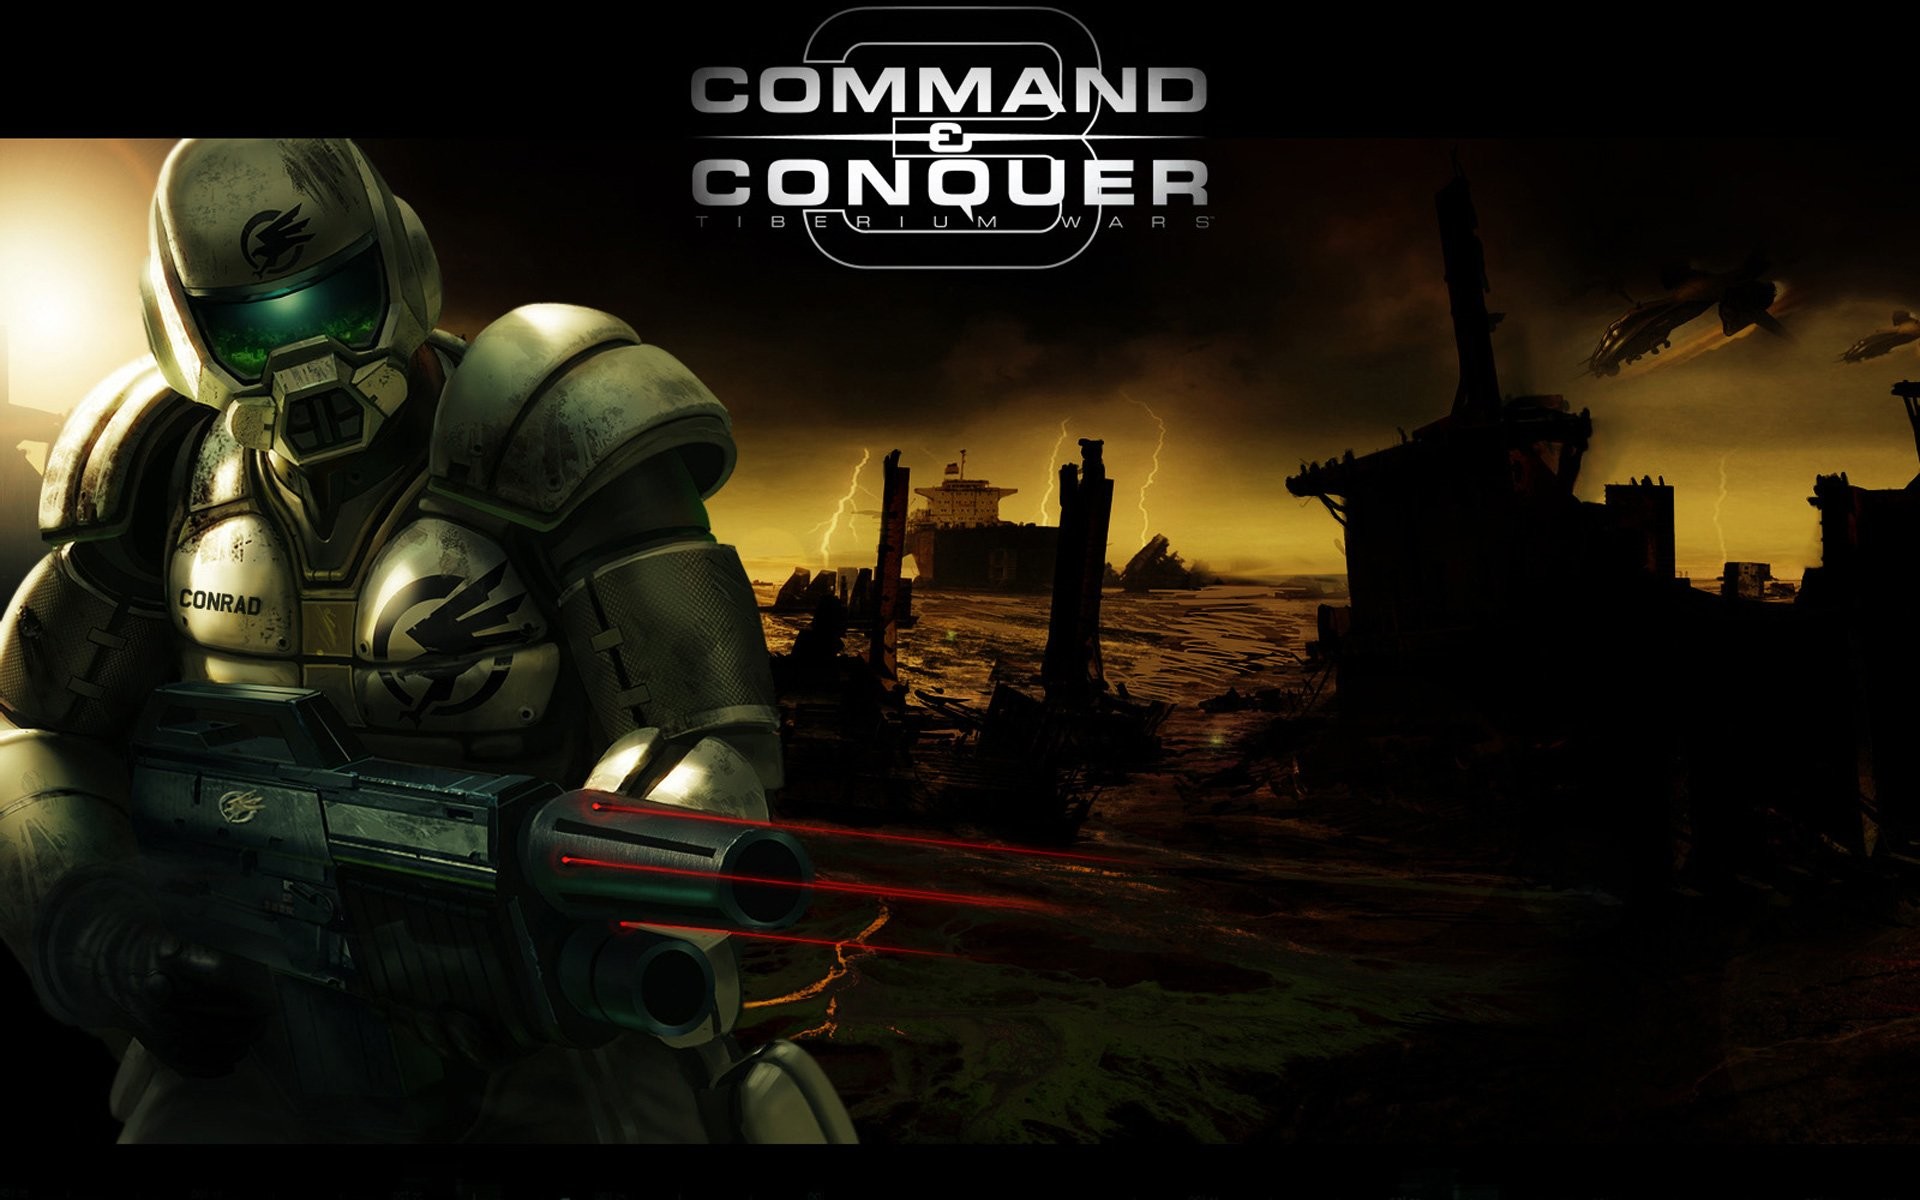 1920x1200 Video Game - Command & Conquer Wallpaper